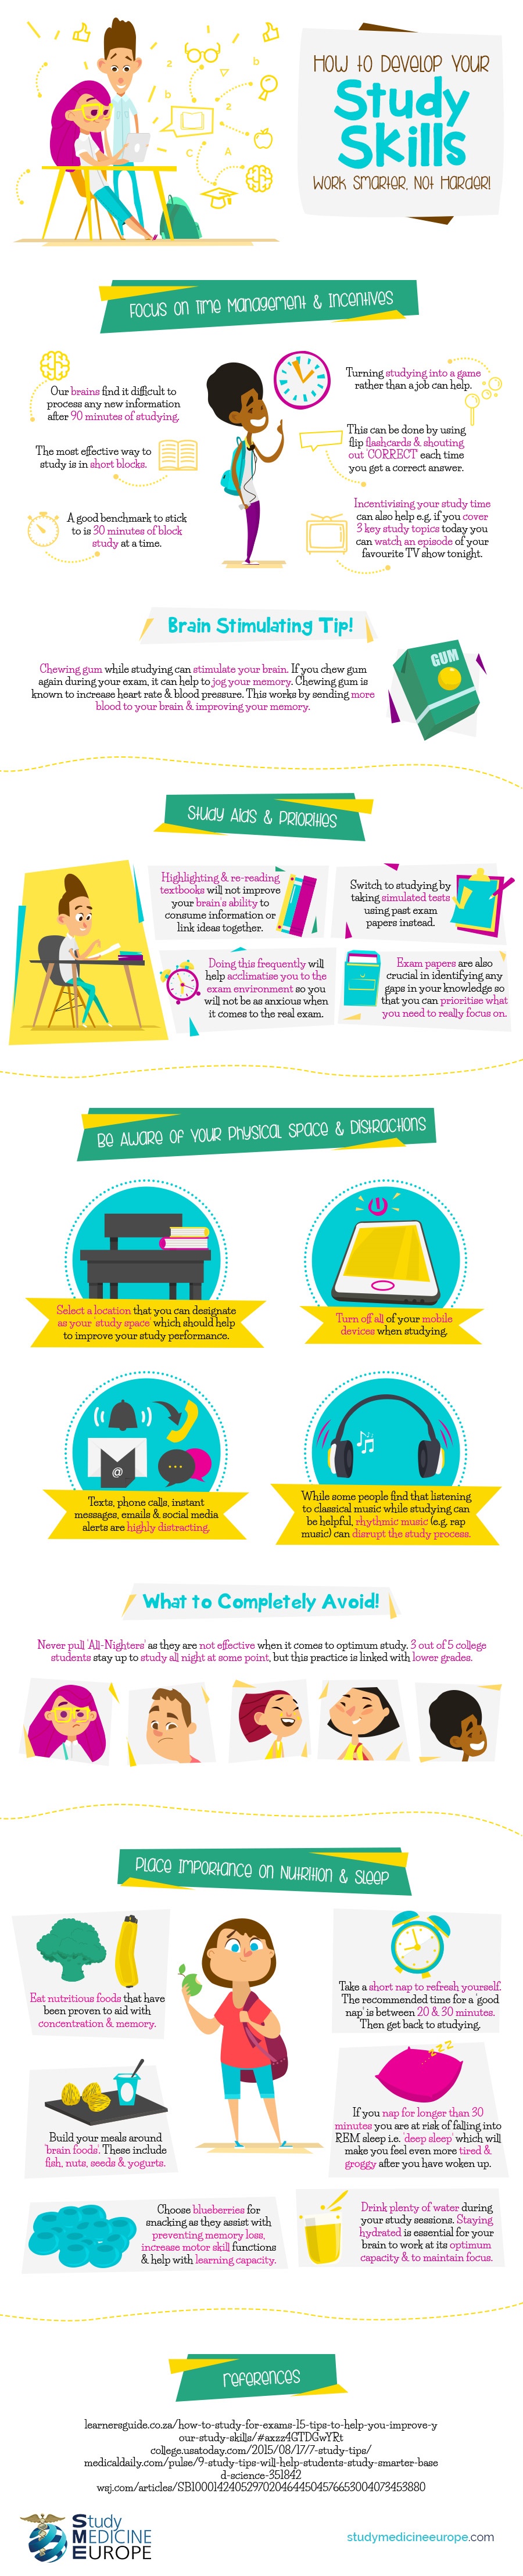 how-to-develop-your-study-skills--work-smarter-not-harder-infographic-plaza